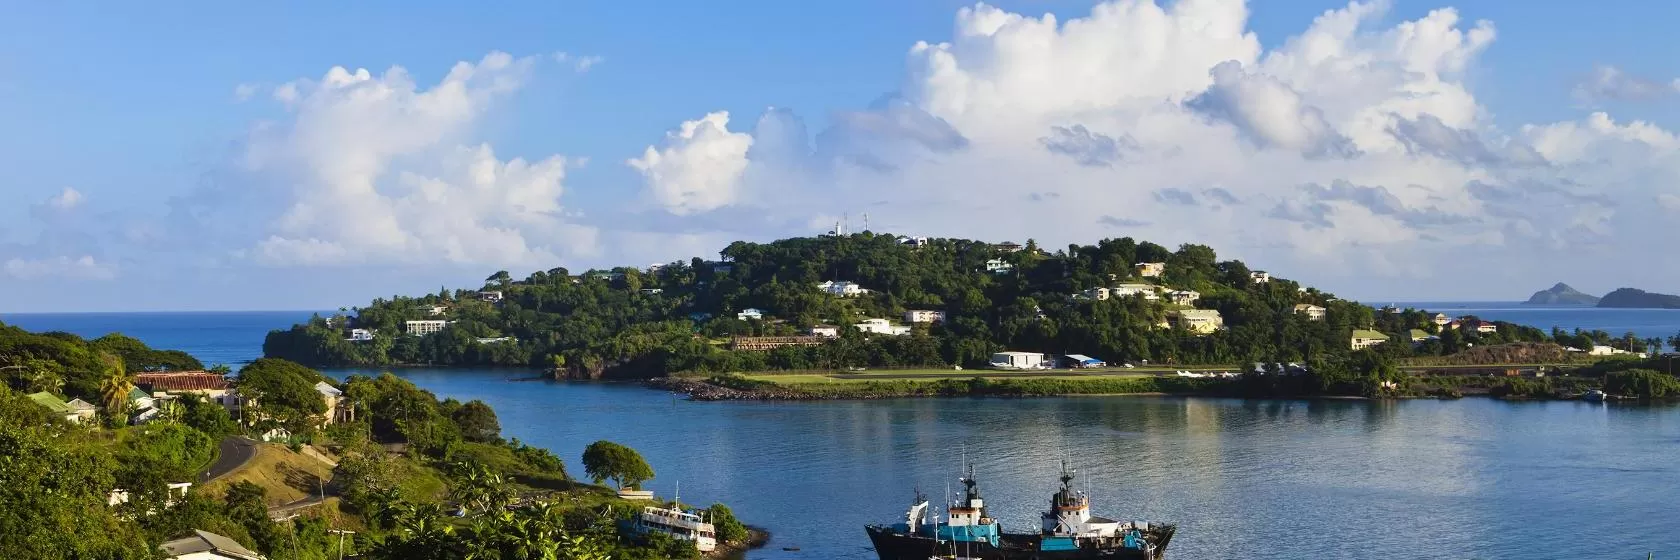 Places to Stay in magical St. Lucia